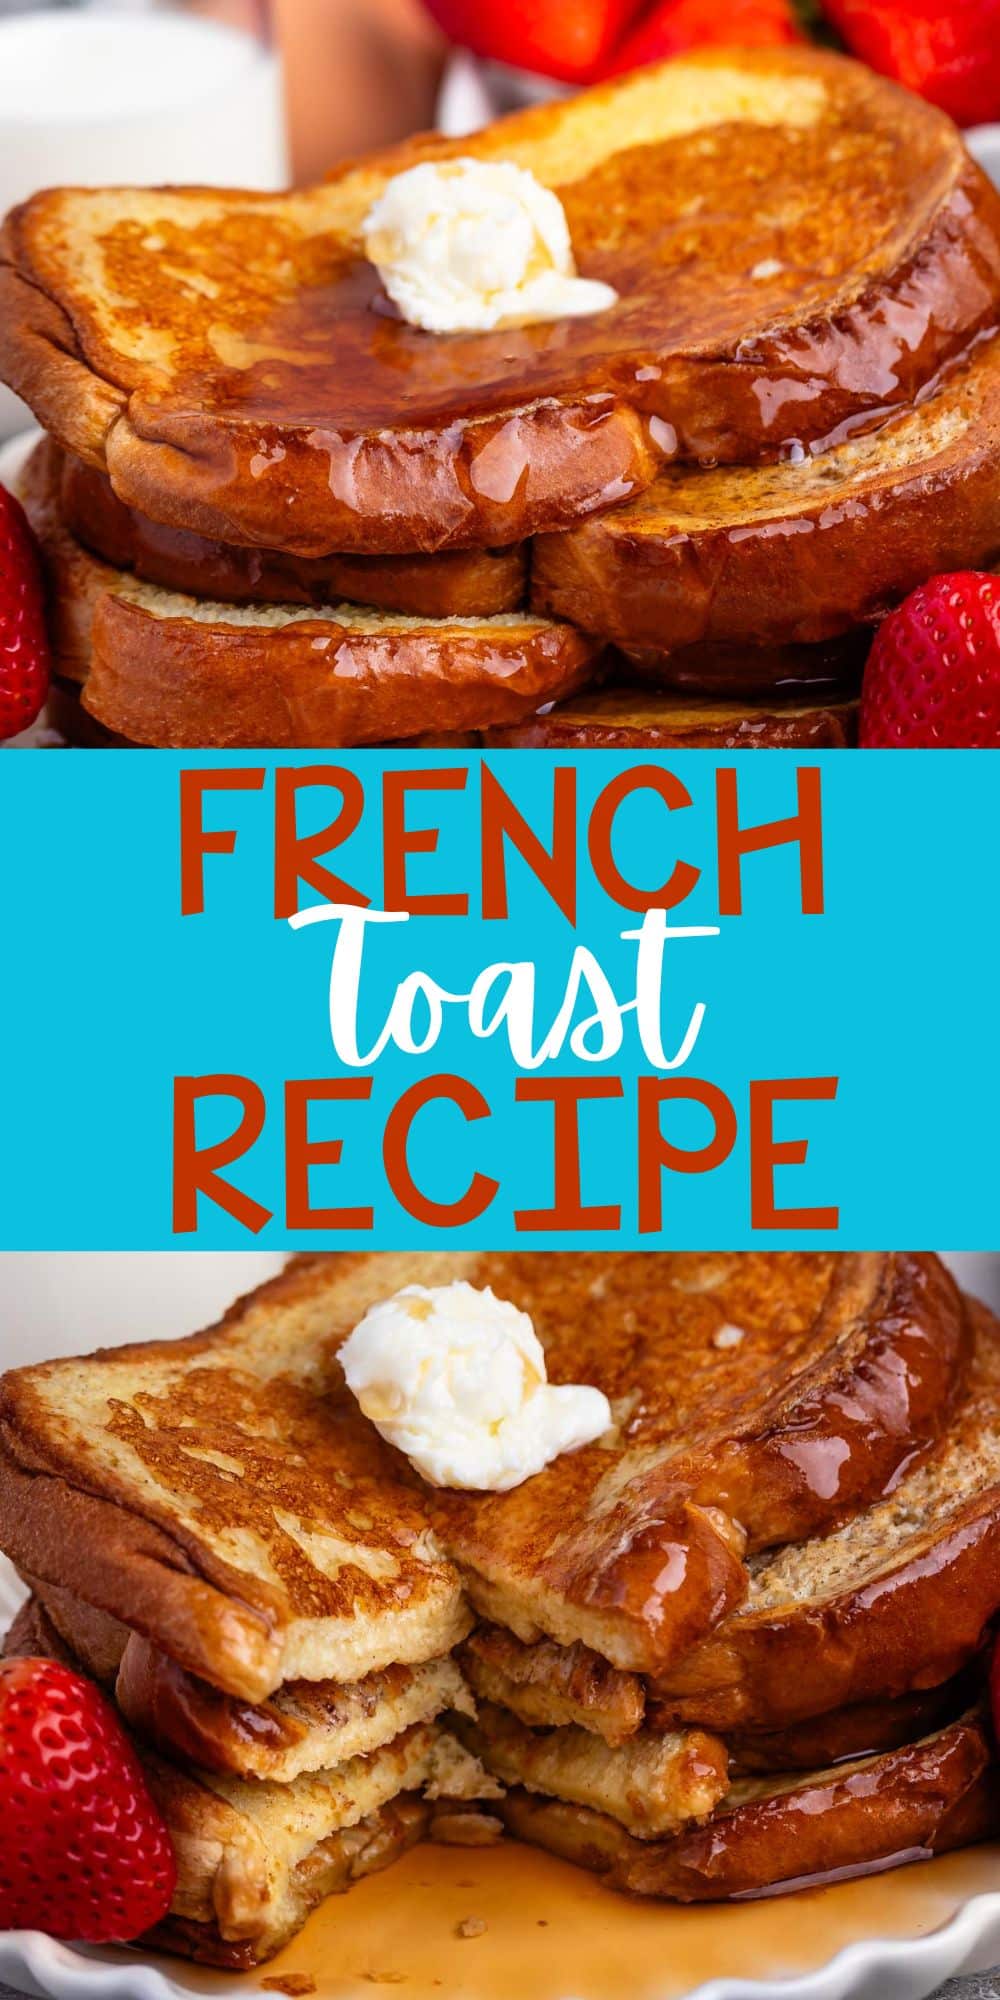 two photos stacked French toast this covered in syrup and butter while be surrounded by strawberries with words on the image.